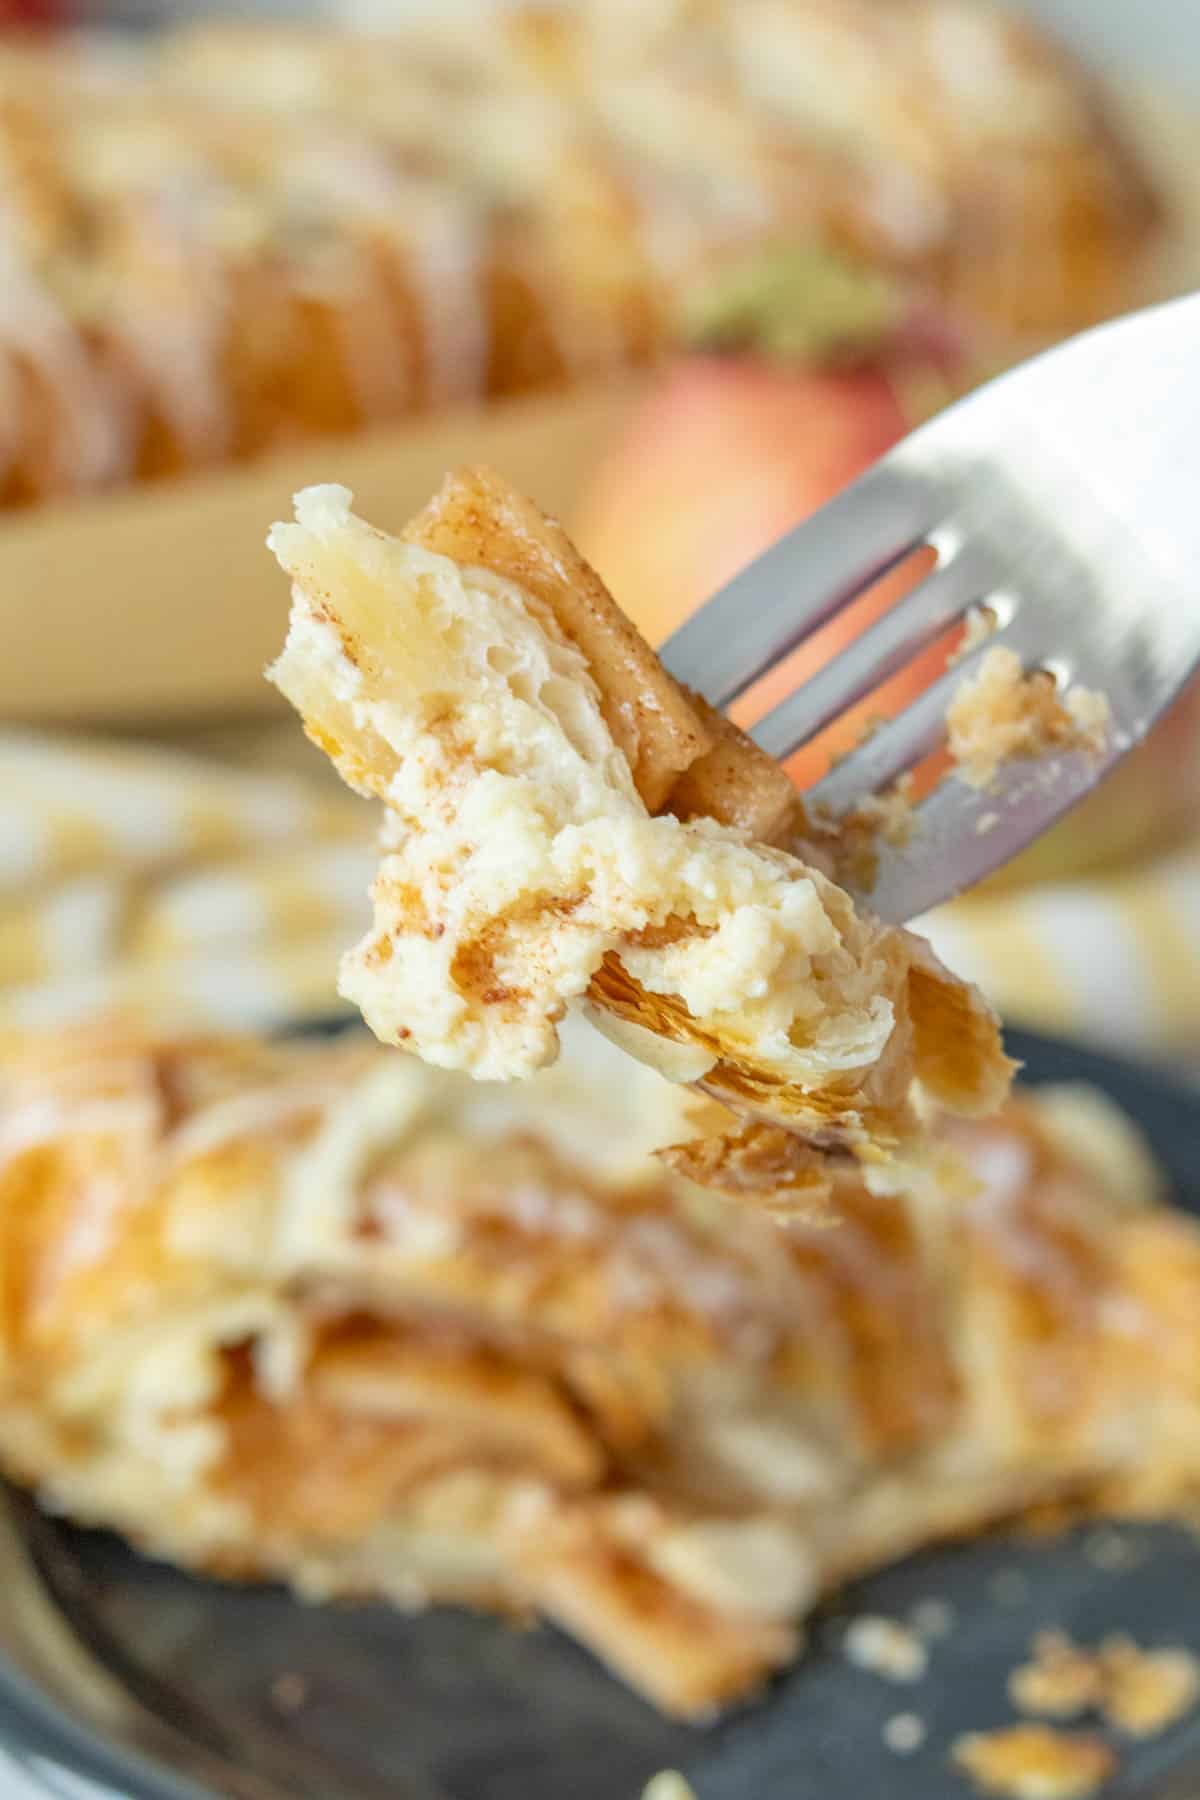 A fork is being used to pick up a piece of apple danish.